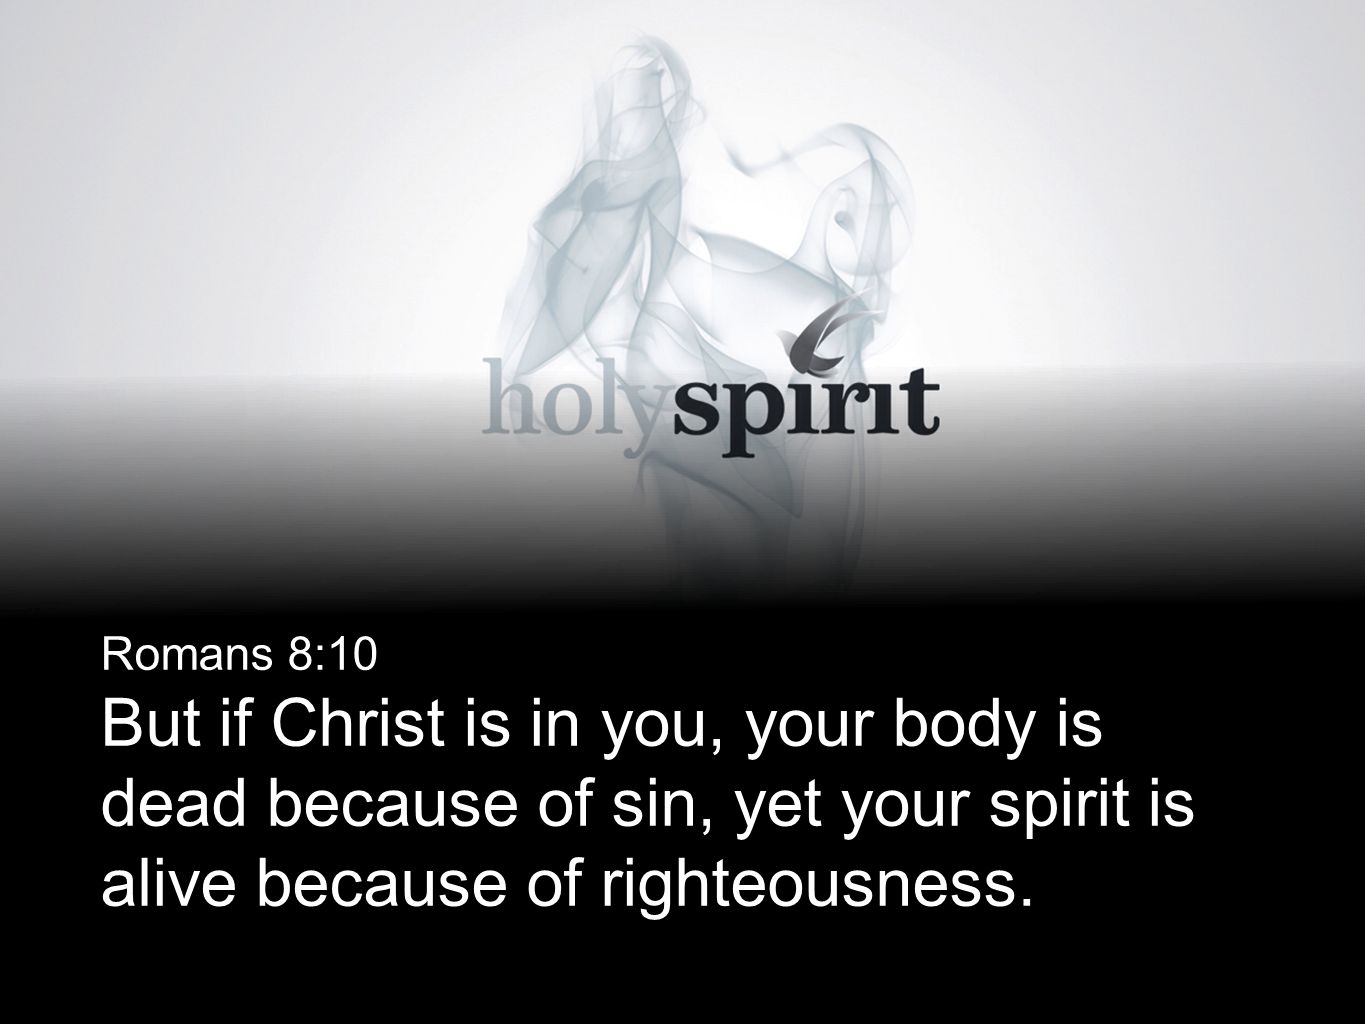 Romans 8:10 But if Christ is in you, your body is dead because of sin, yet your spirit is alive because of righteousness.